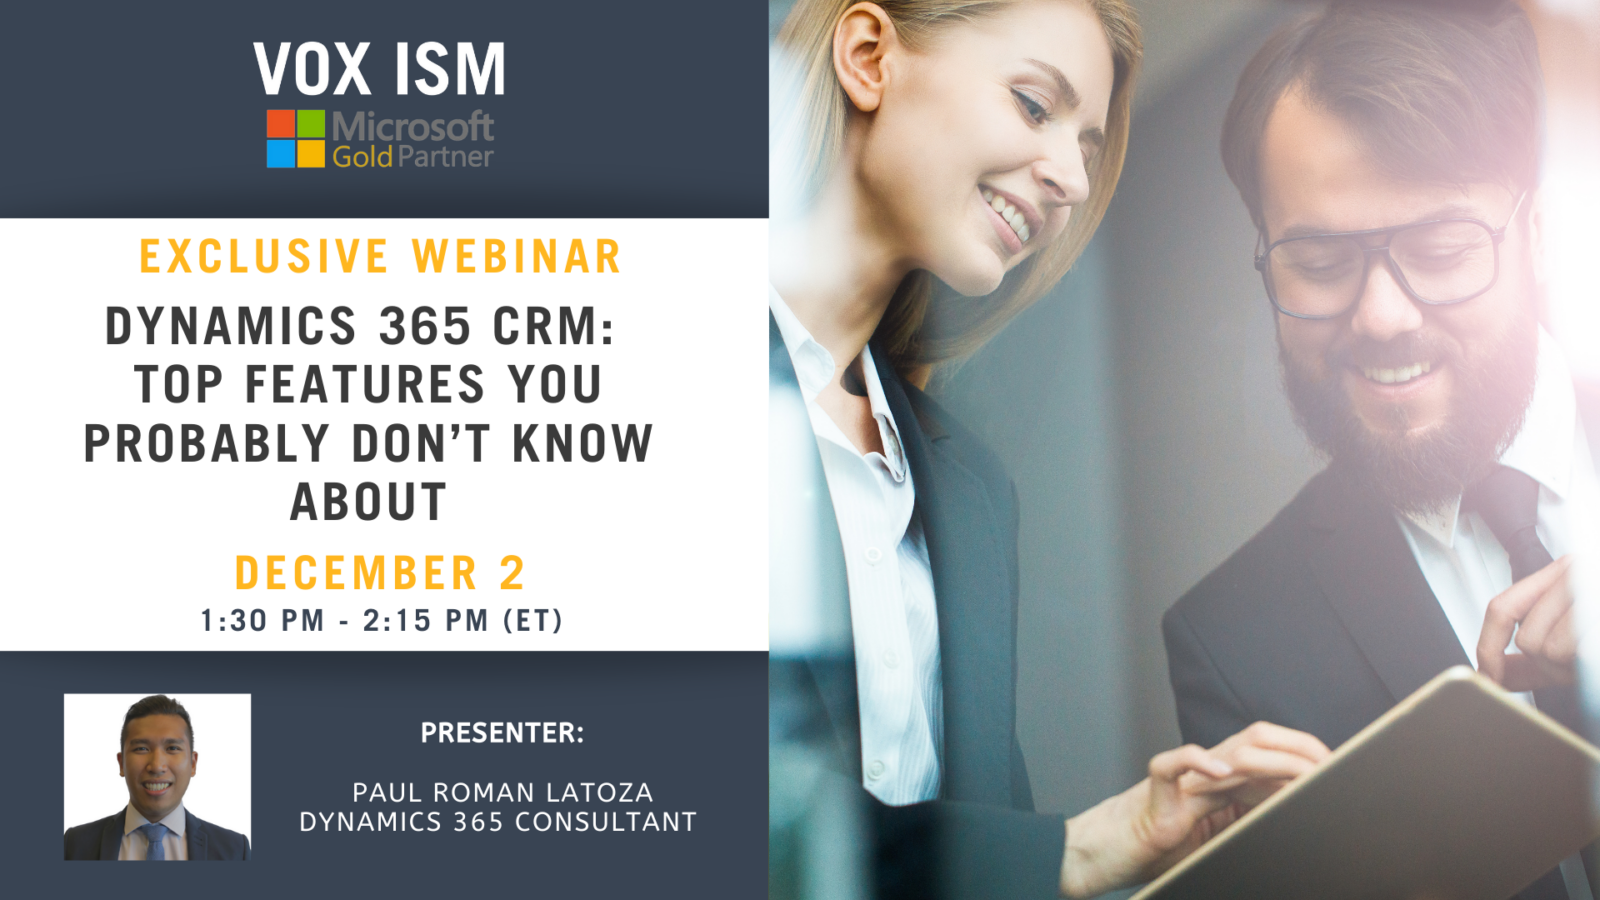 Dynamics 365 CRM: Top features you probably don’t know about - December 2 - Webinar